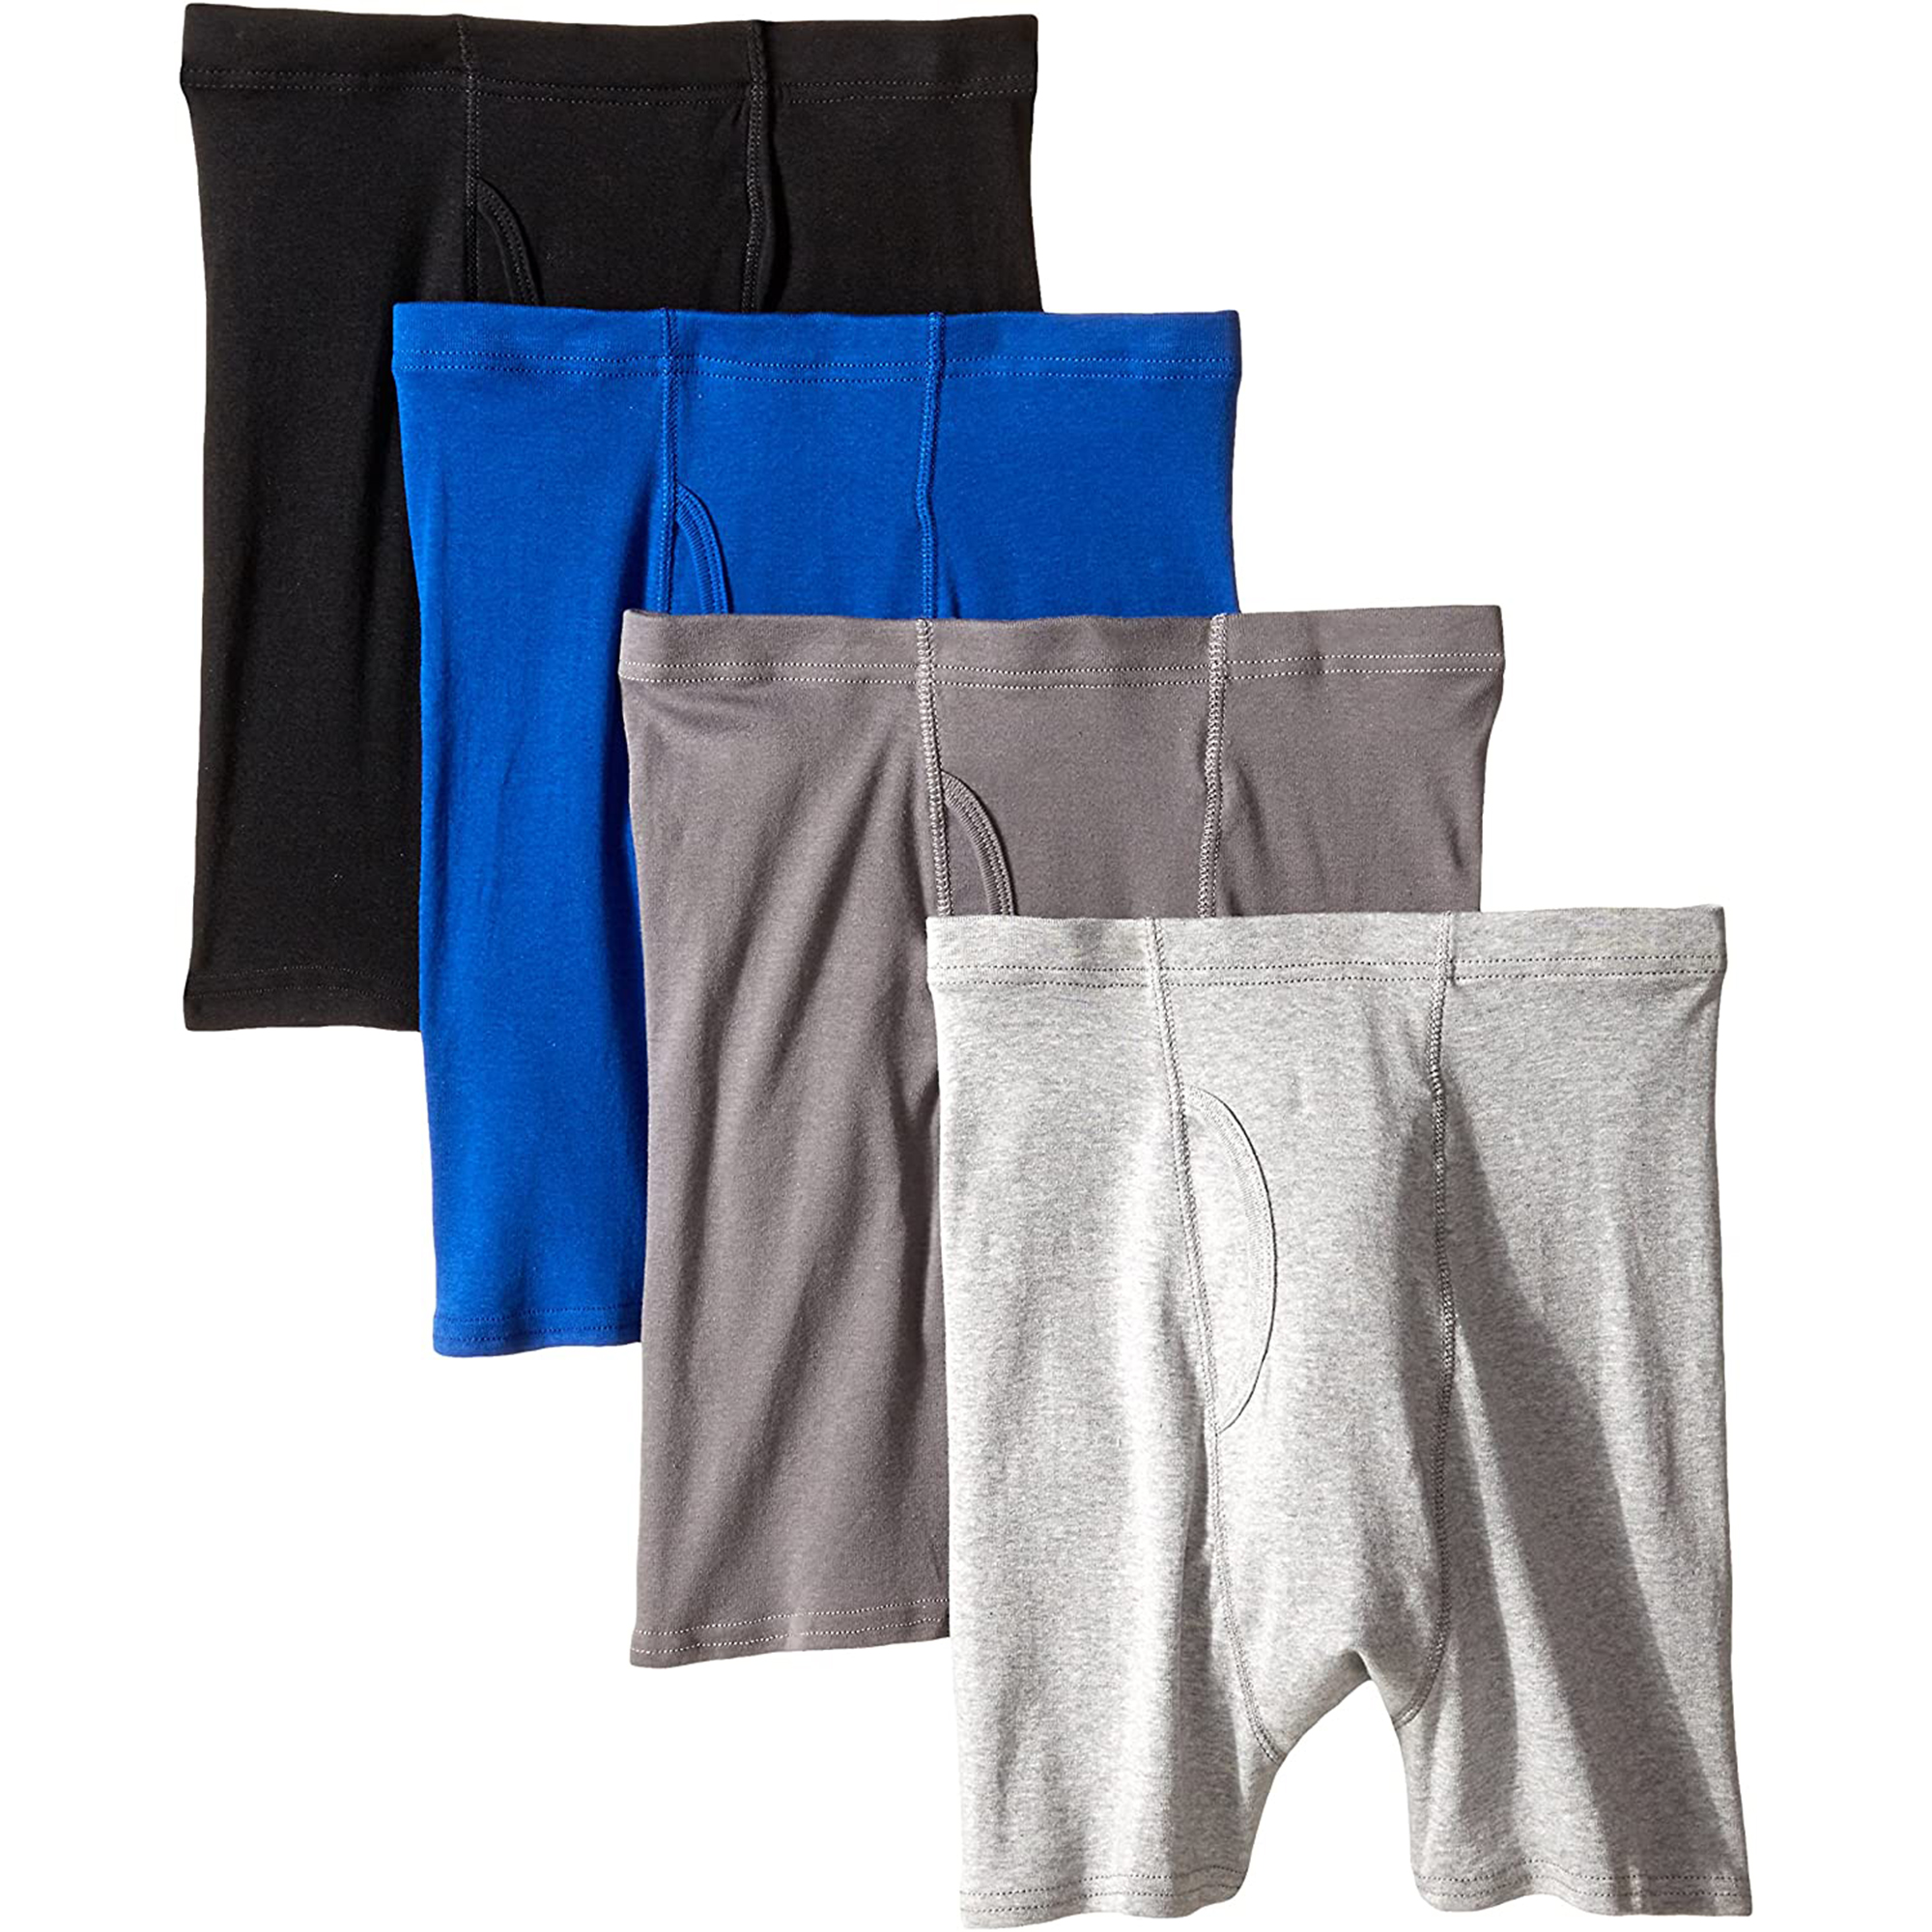 Hanes Men's 4 Pack Tagless Boxer Briefs Assorted Colors Comfortsoft Waistband